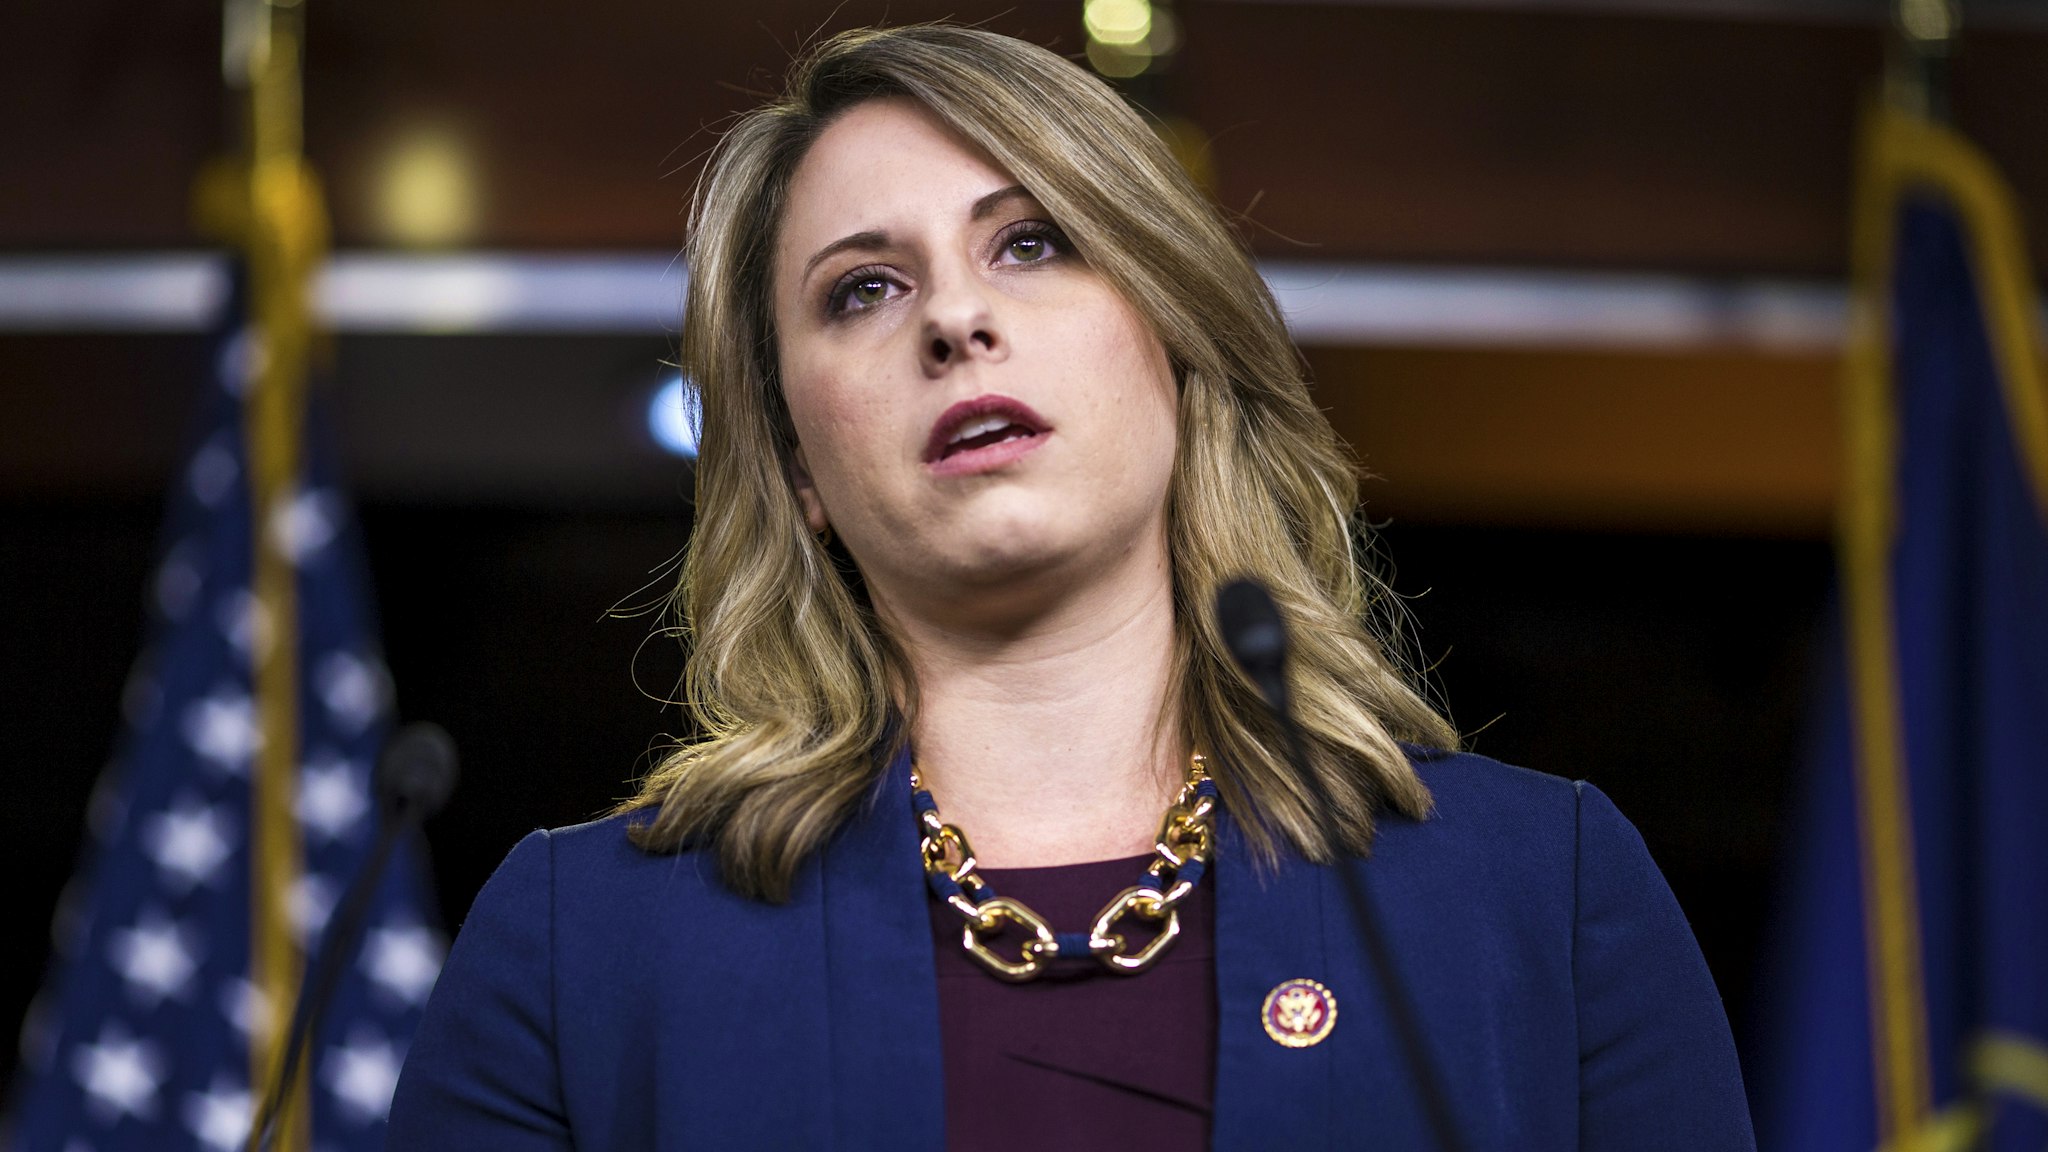 Rep. Katie Hill (D-CA) speaks during a news conference on April 9, 2019 in Washington, DC. House Democrats unveiled new letters to the Attorney General, HHS Secretary, and the White House demanding the production of documents related to Americans health care in the Texas v. United States lawsuit.